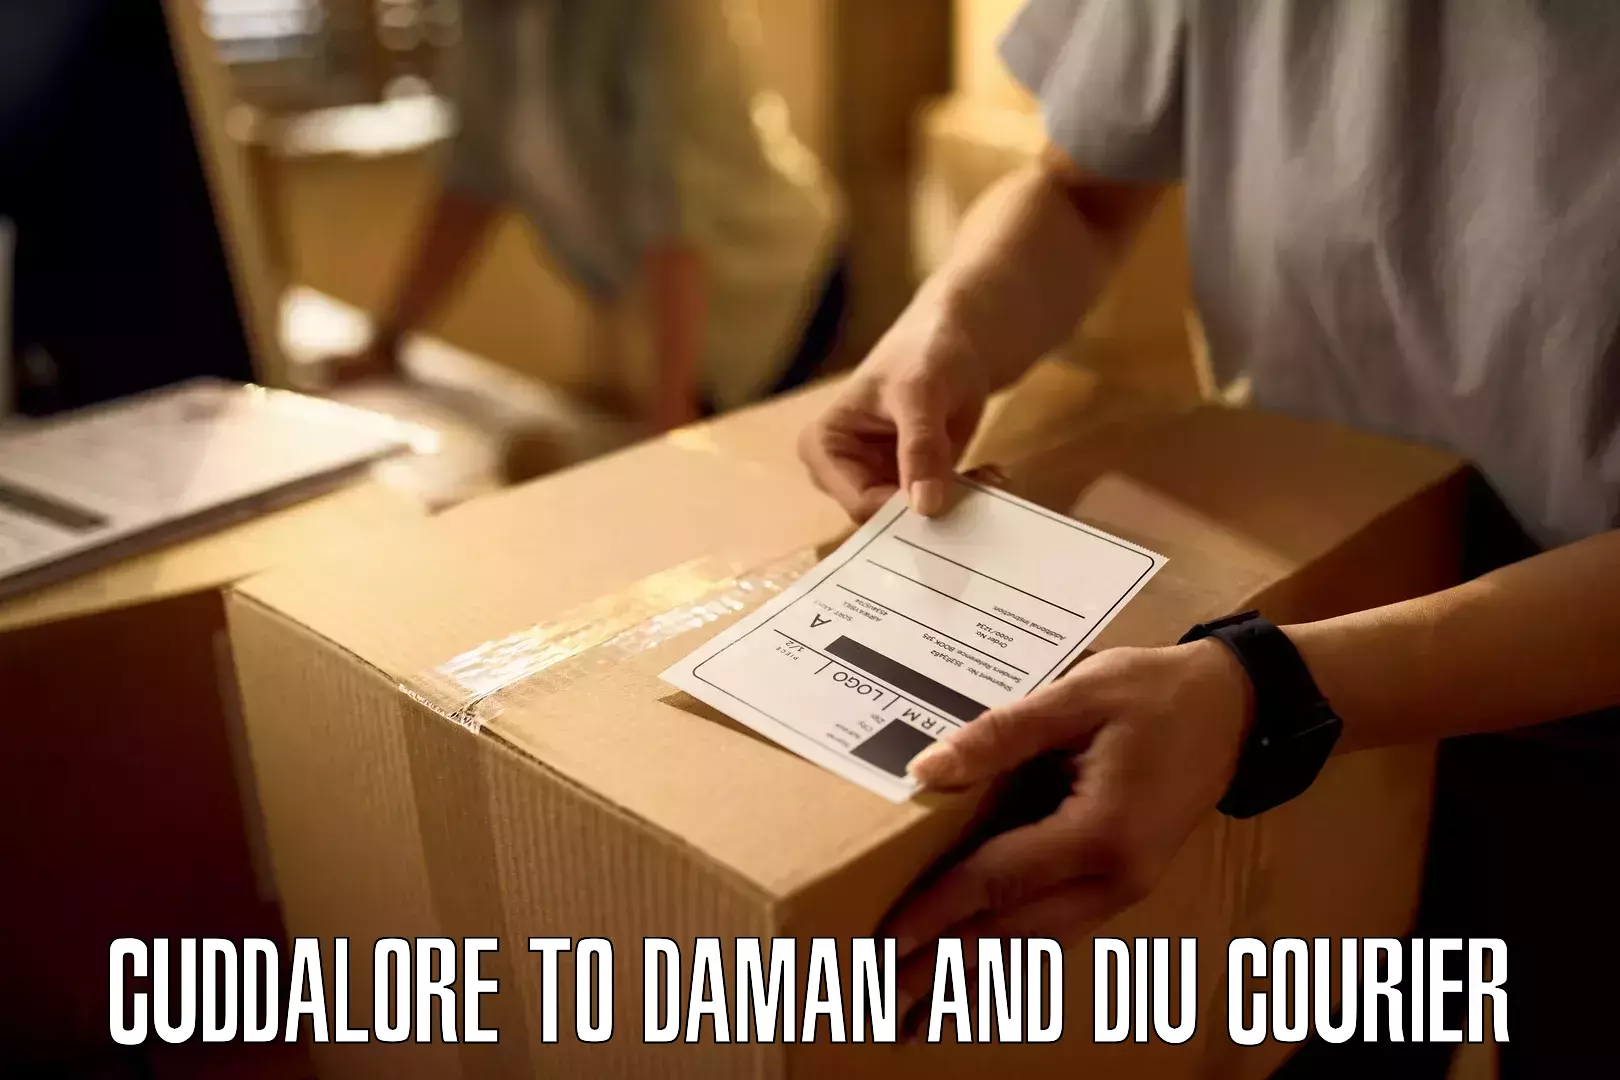 Courier service innovation Cuddalore to Diu